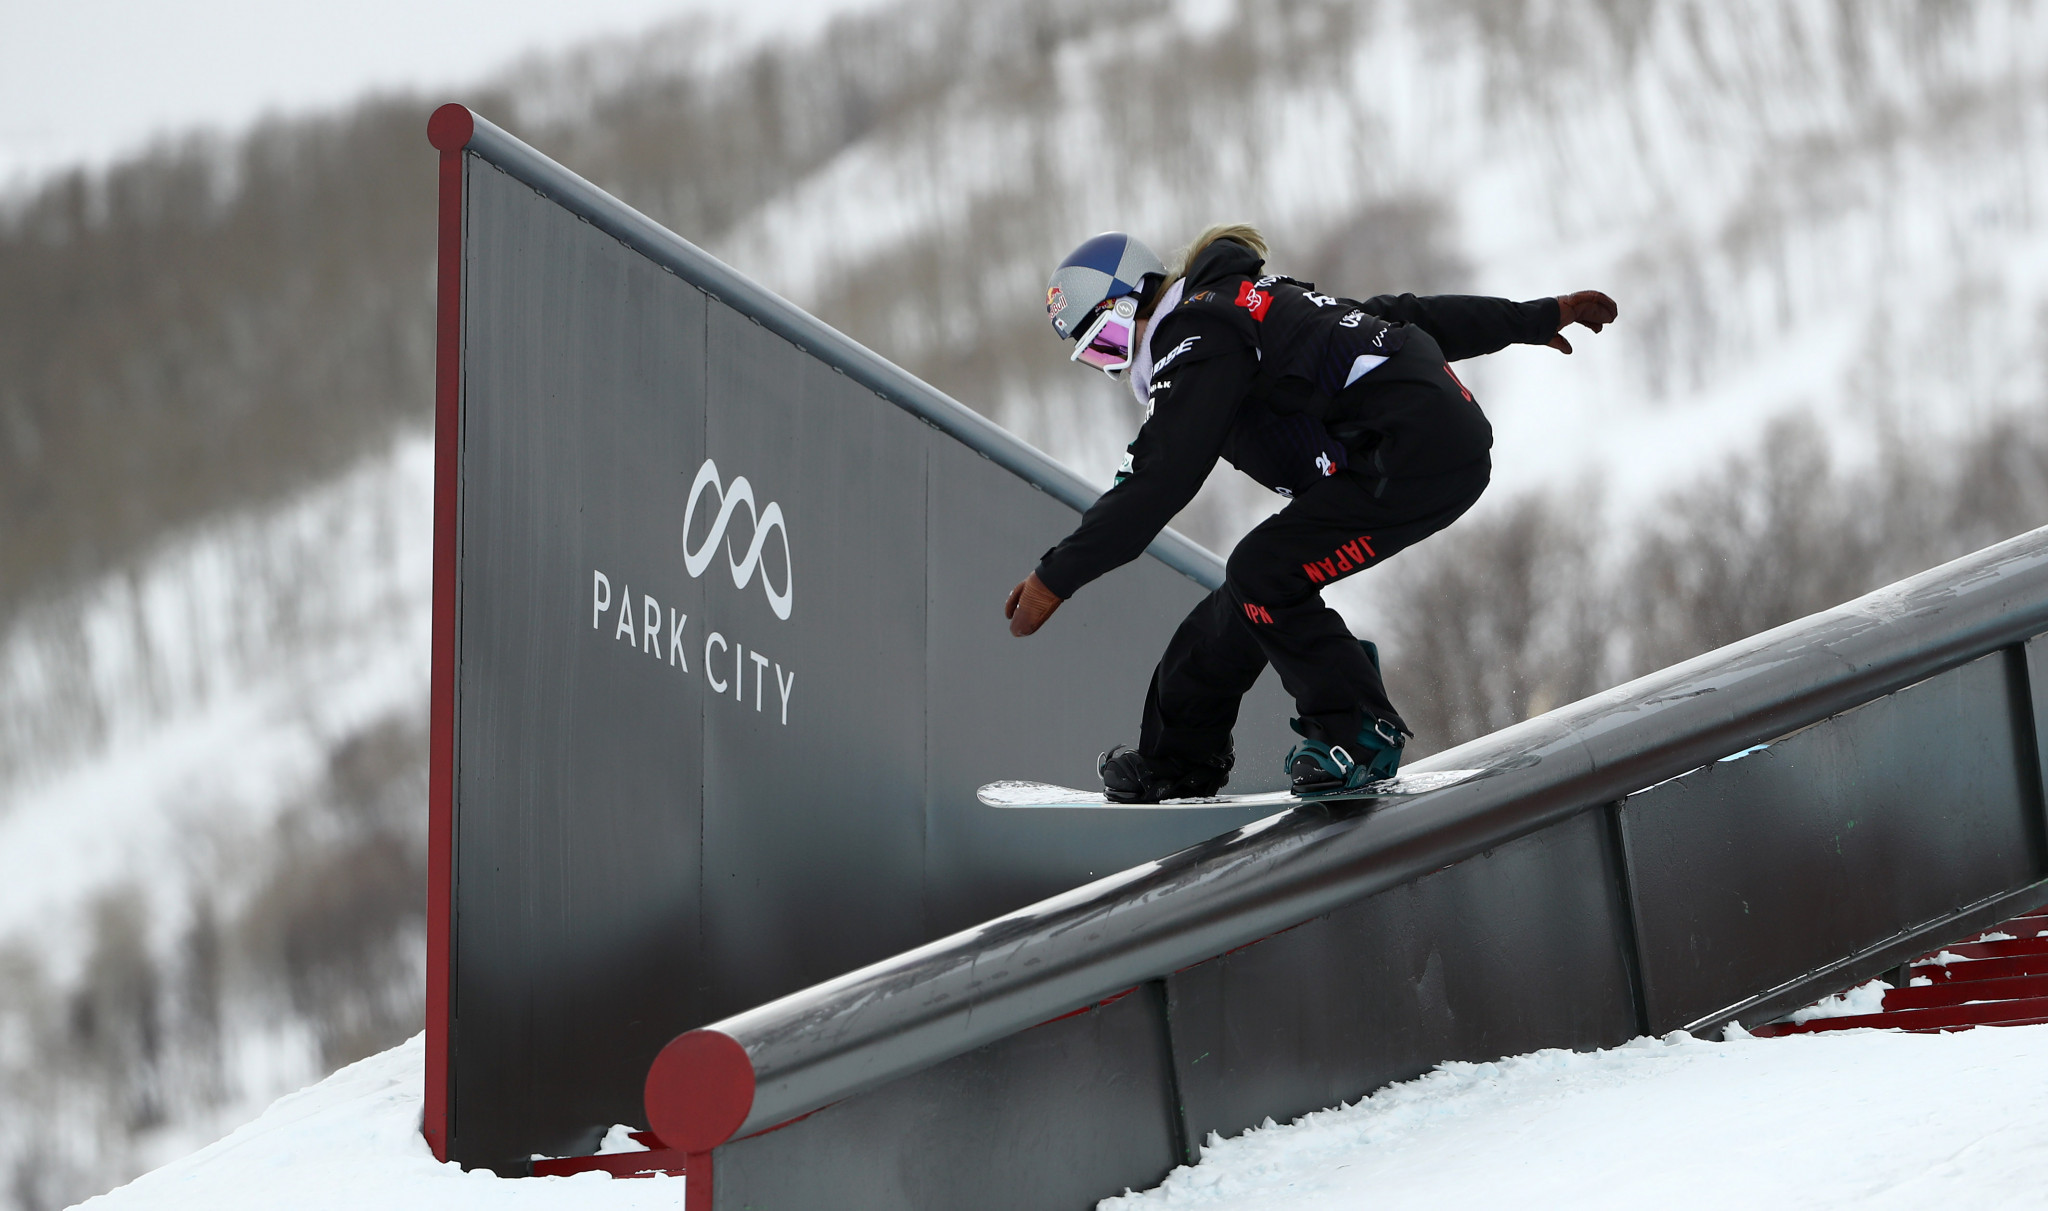 The International Ski Federation and the World Snowboard Federation have signed a historic agreement to unify competitive snowboarding ©Getty Images